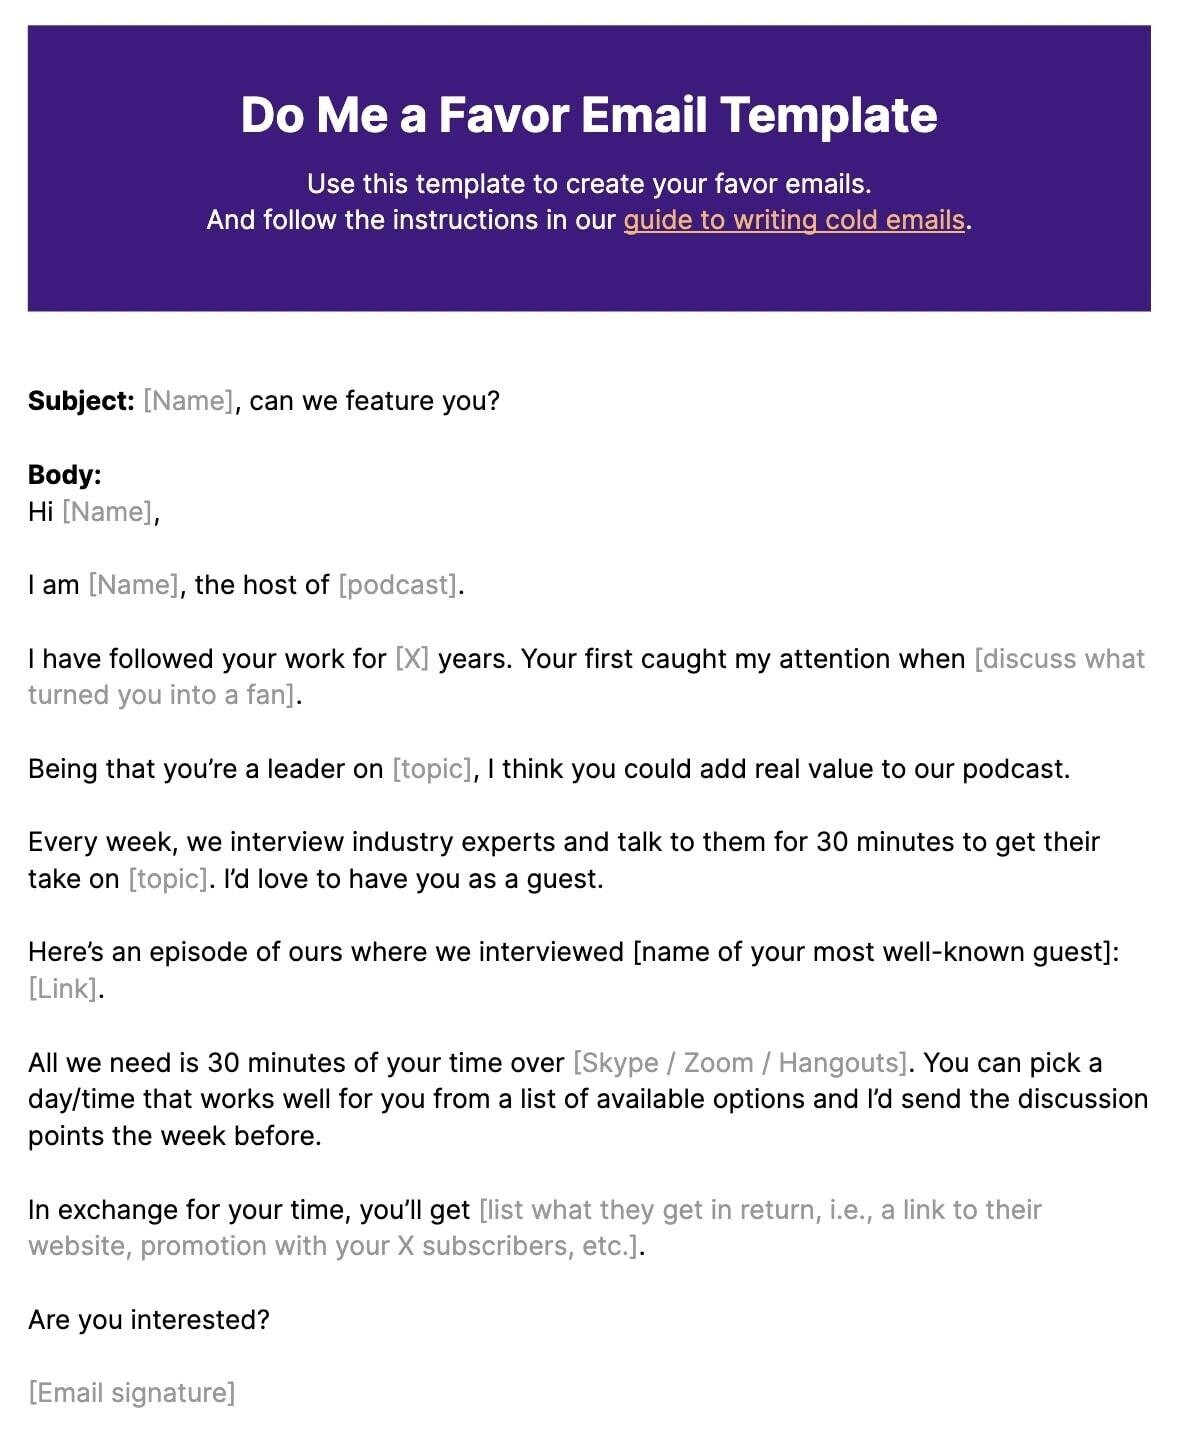 Do Me a Favor Email Template